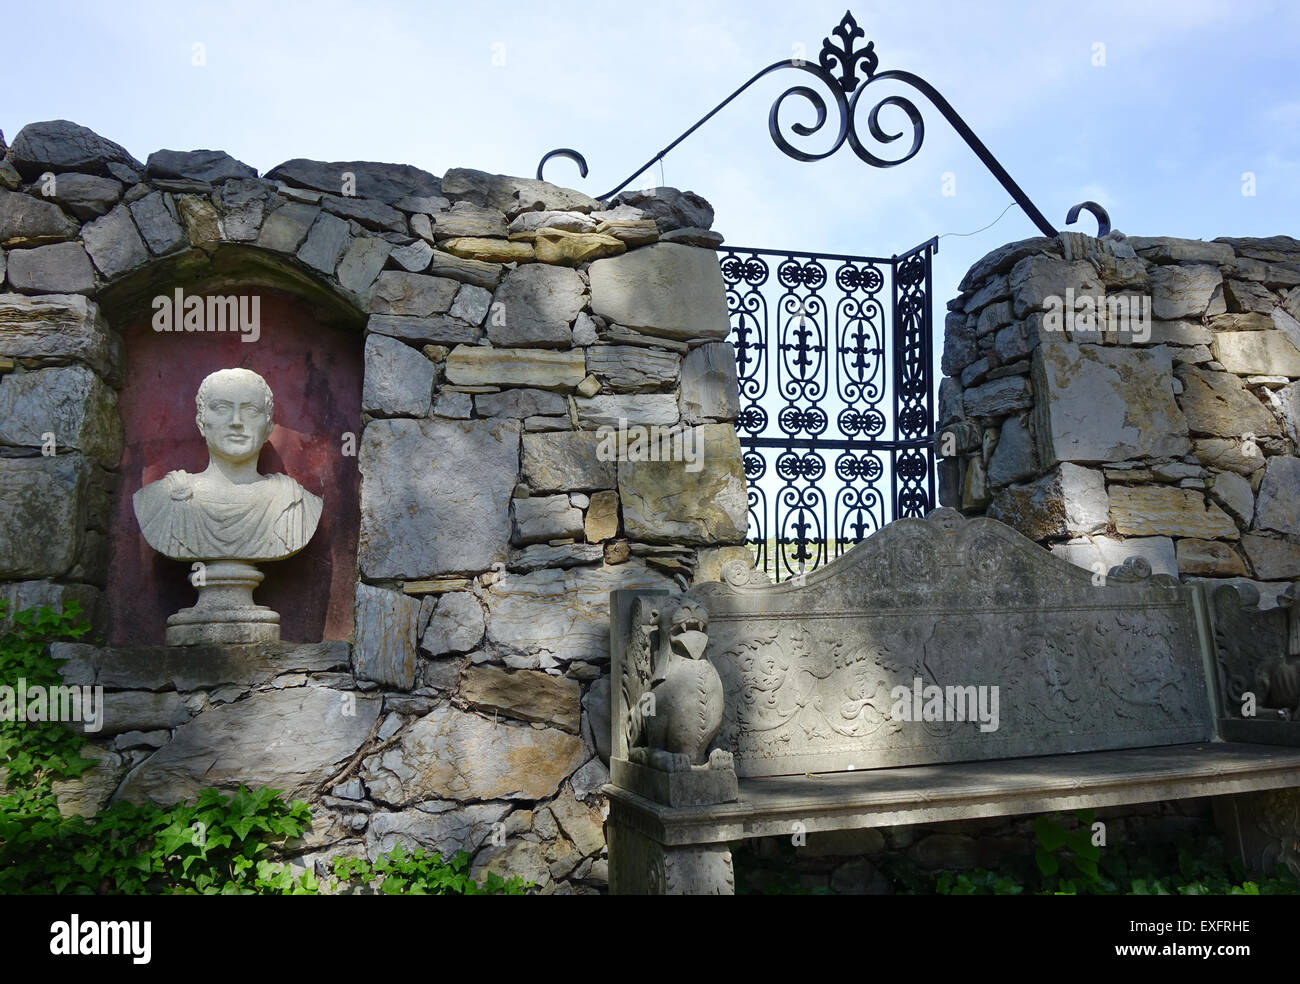 Section of wall with statuary and wrought iron decoration, Glen Burnie gardens, Winchester, Virginia Stock Photo